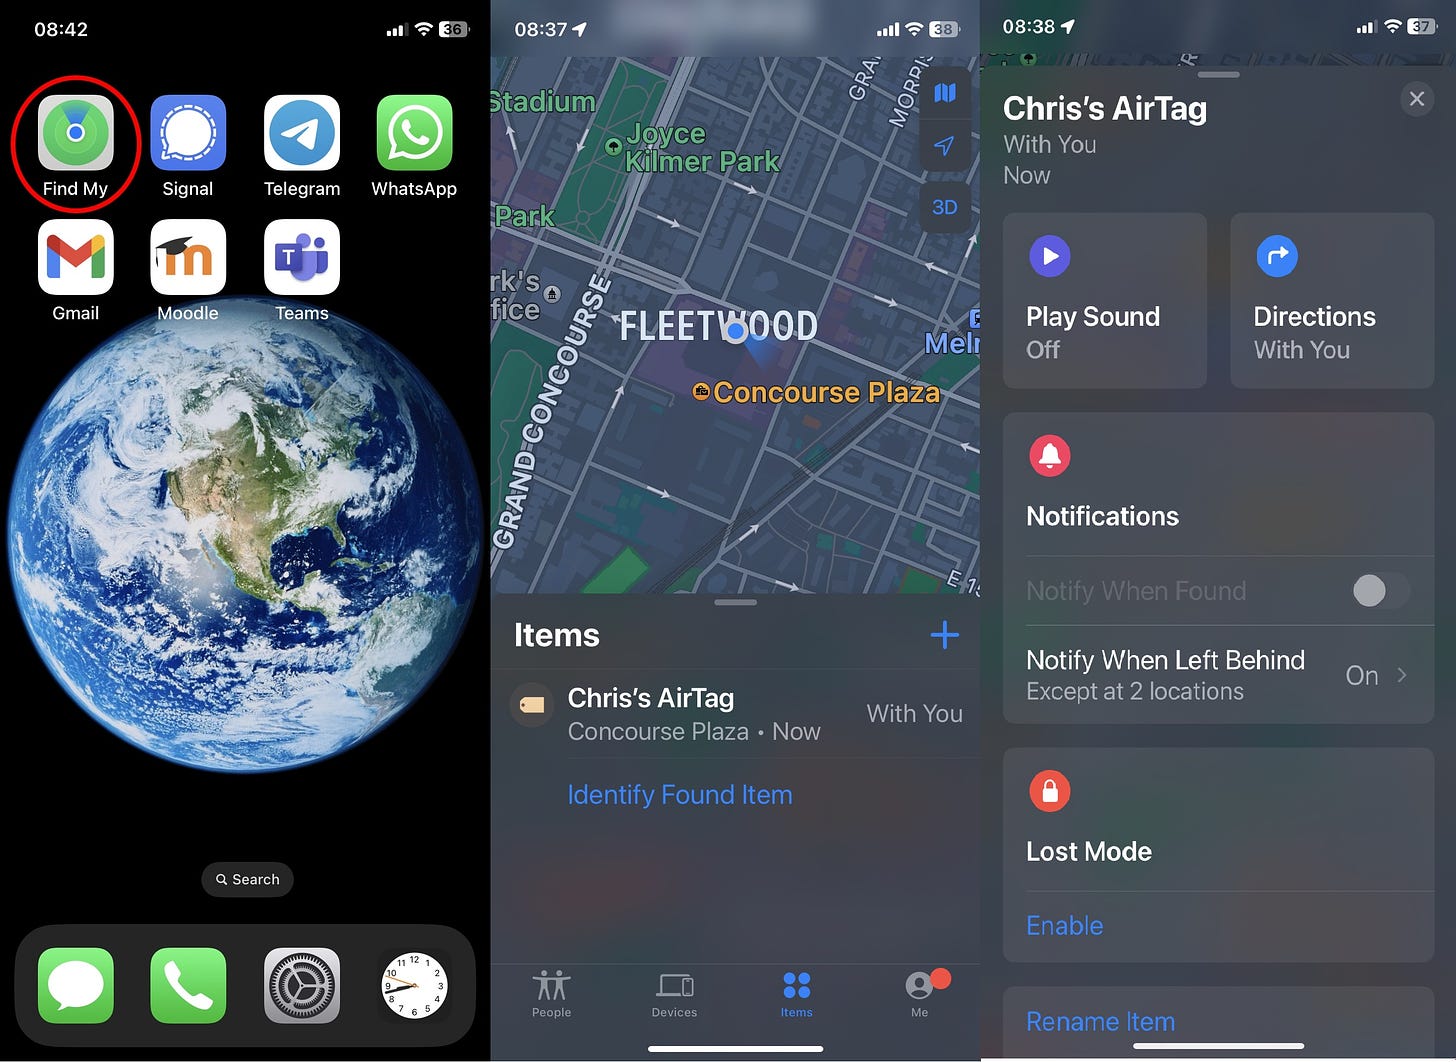 Multiple screenshots displaying the Find My app map and options screens.